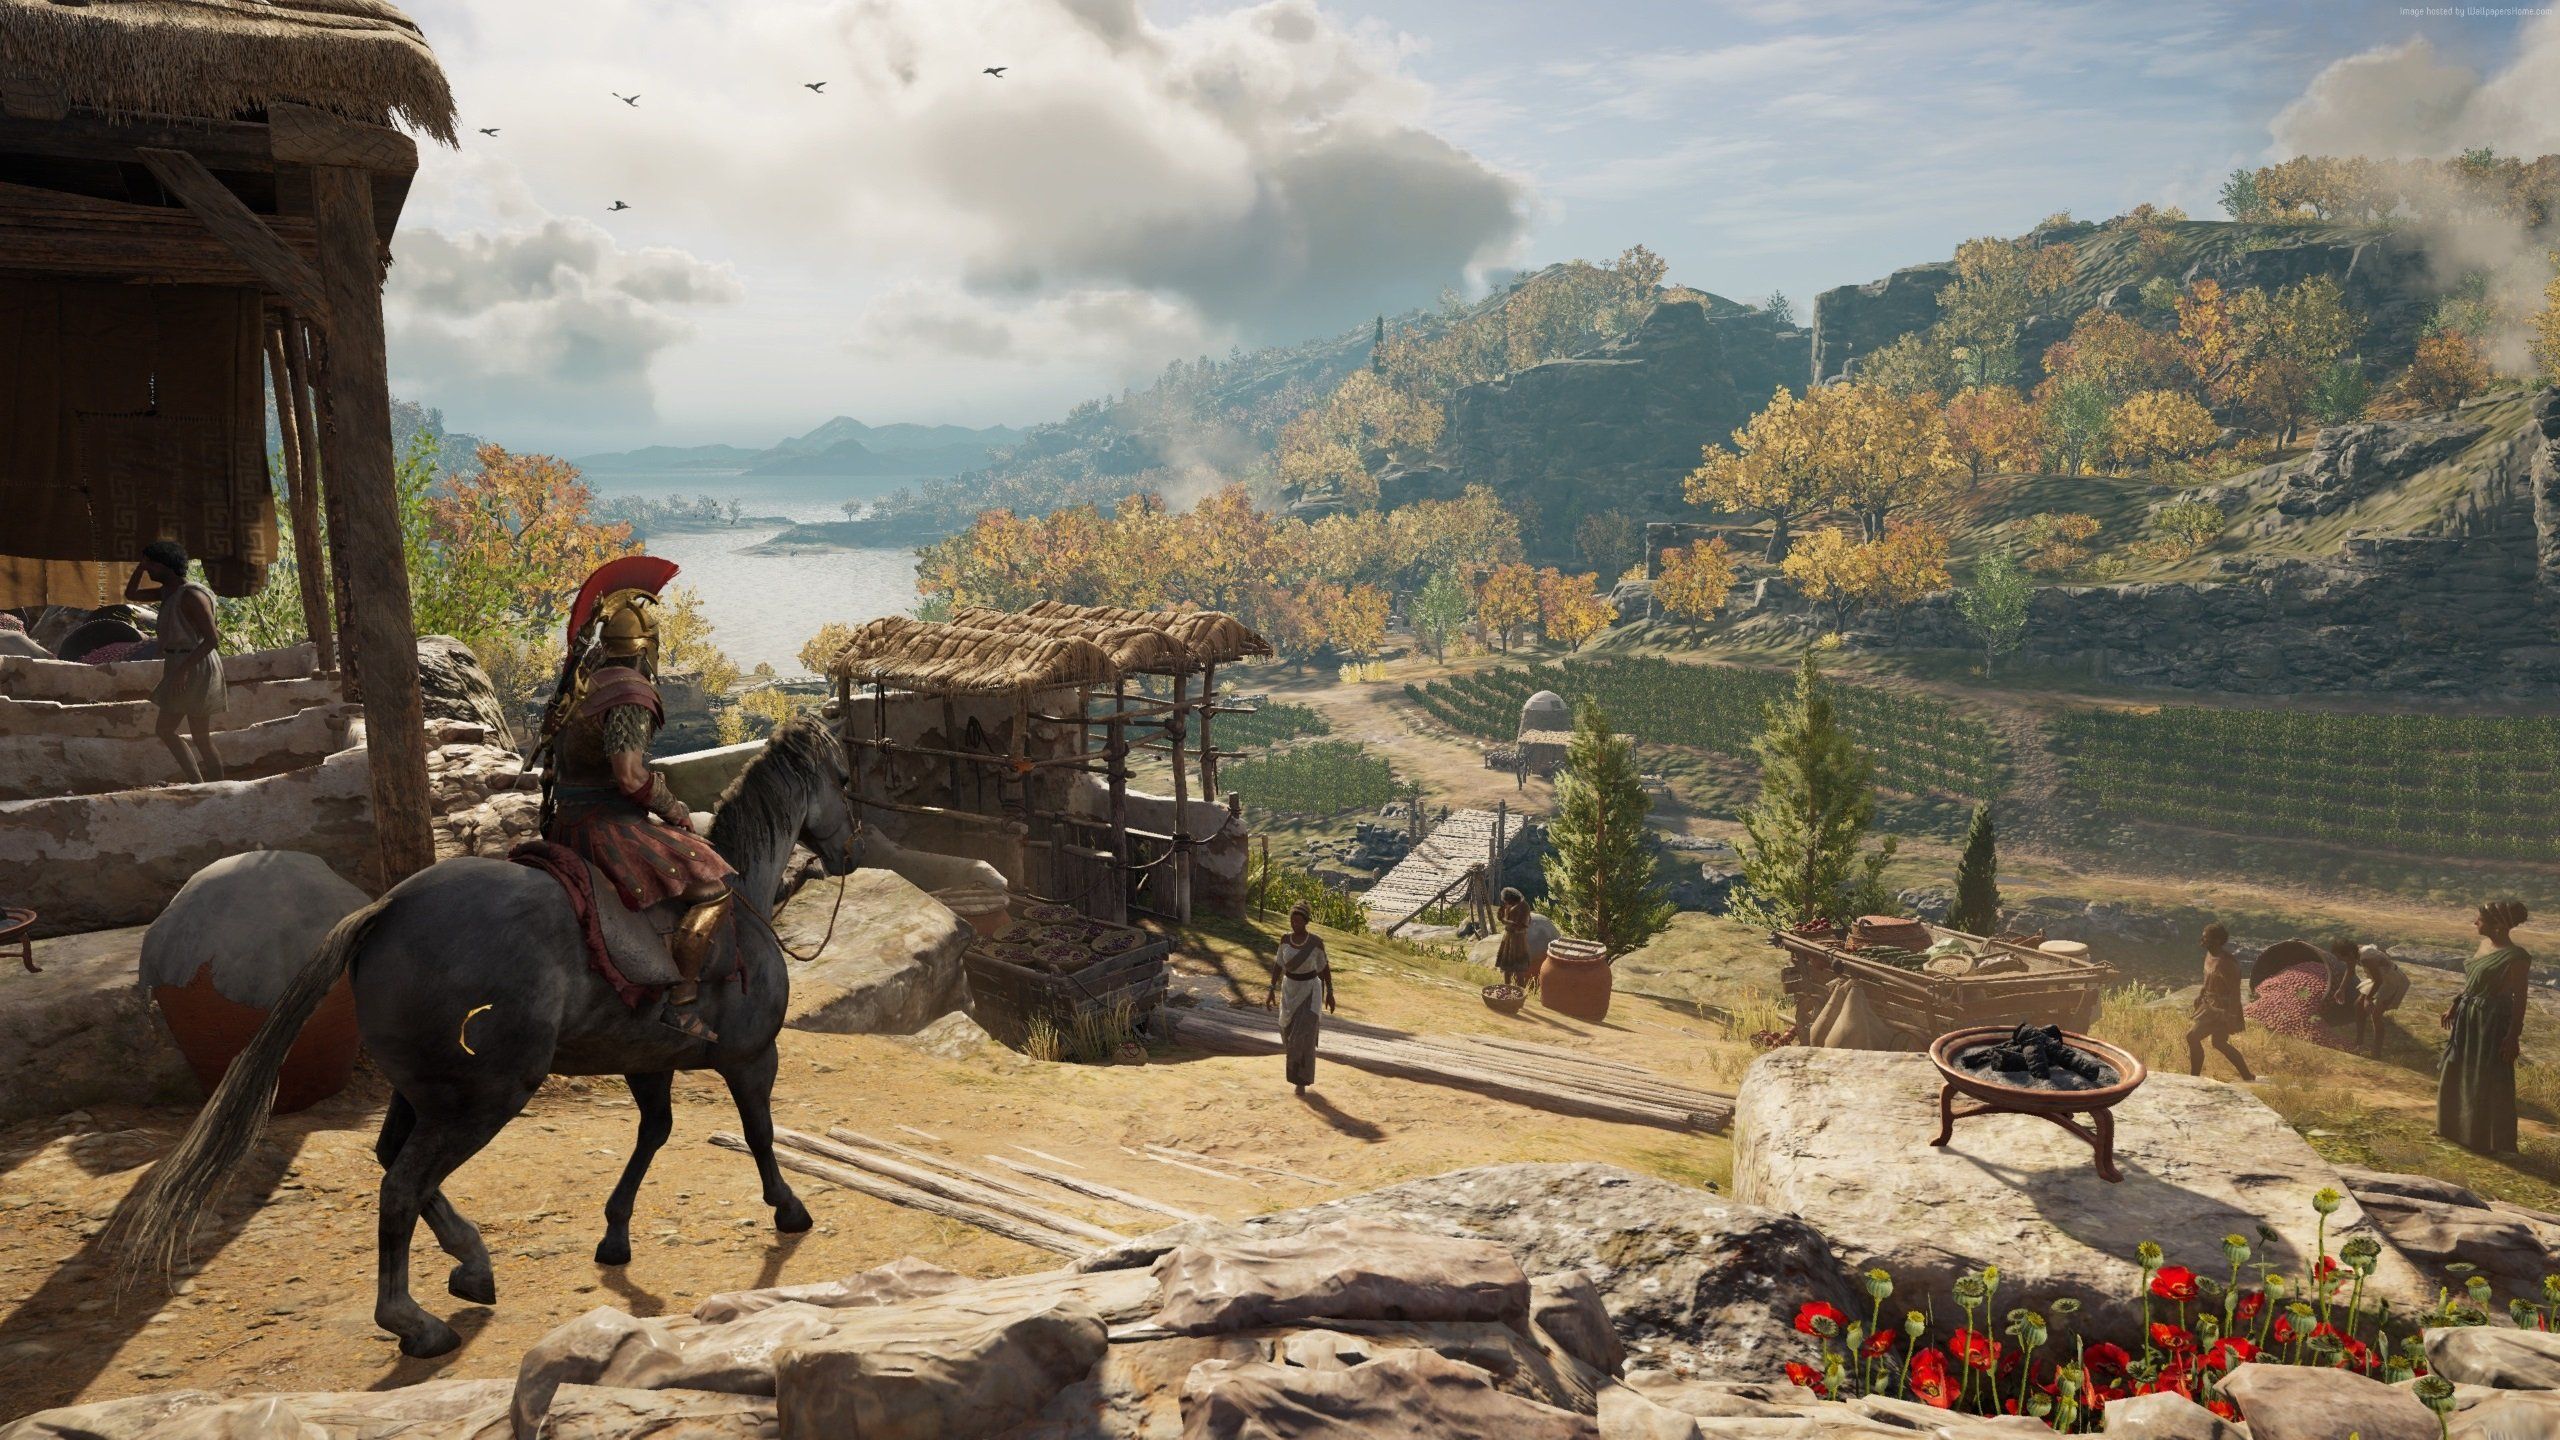 Experience the open world of Assassin's Creed: Odyssey in exclusive gameplay video